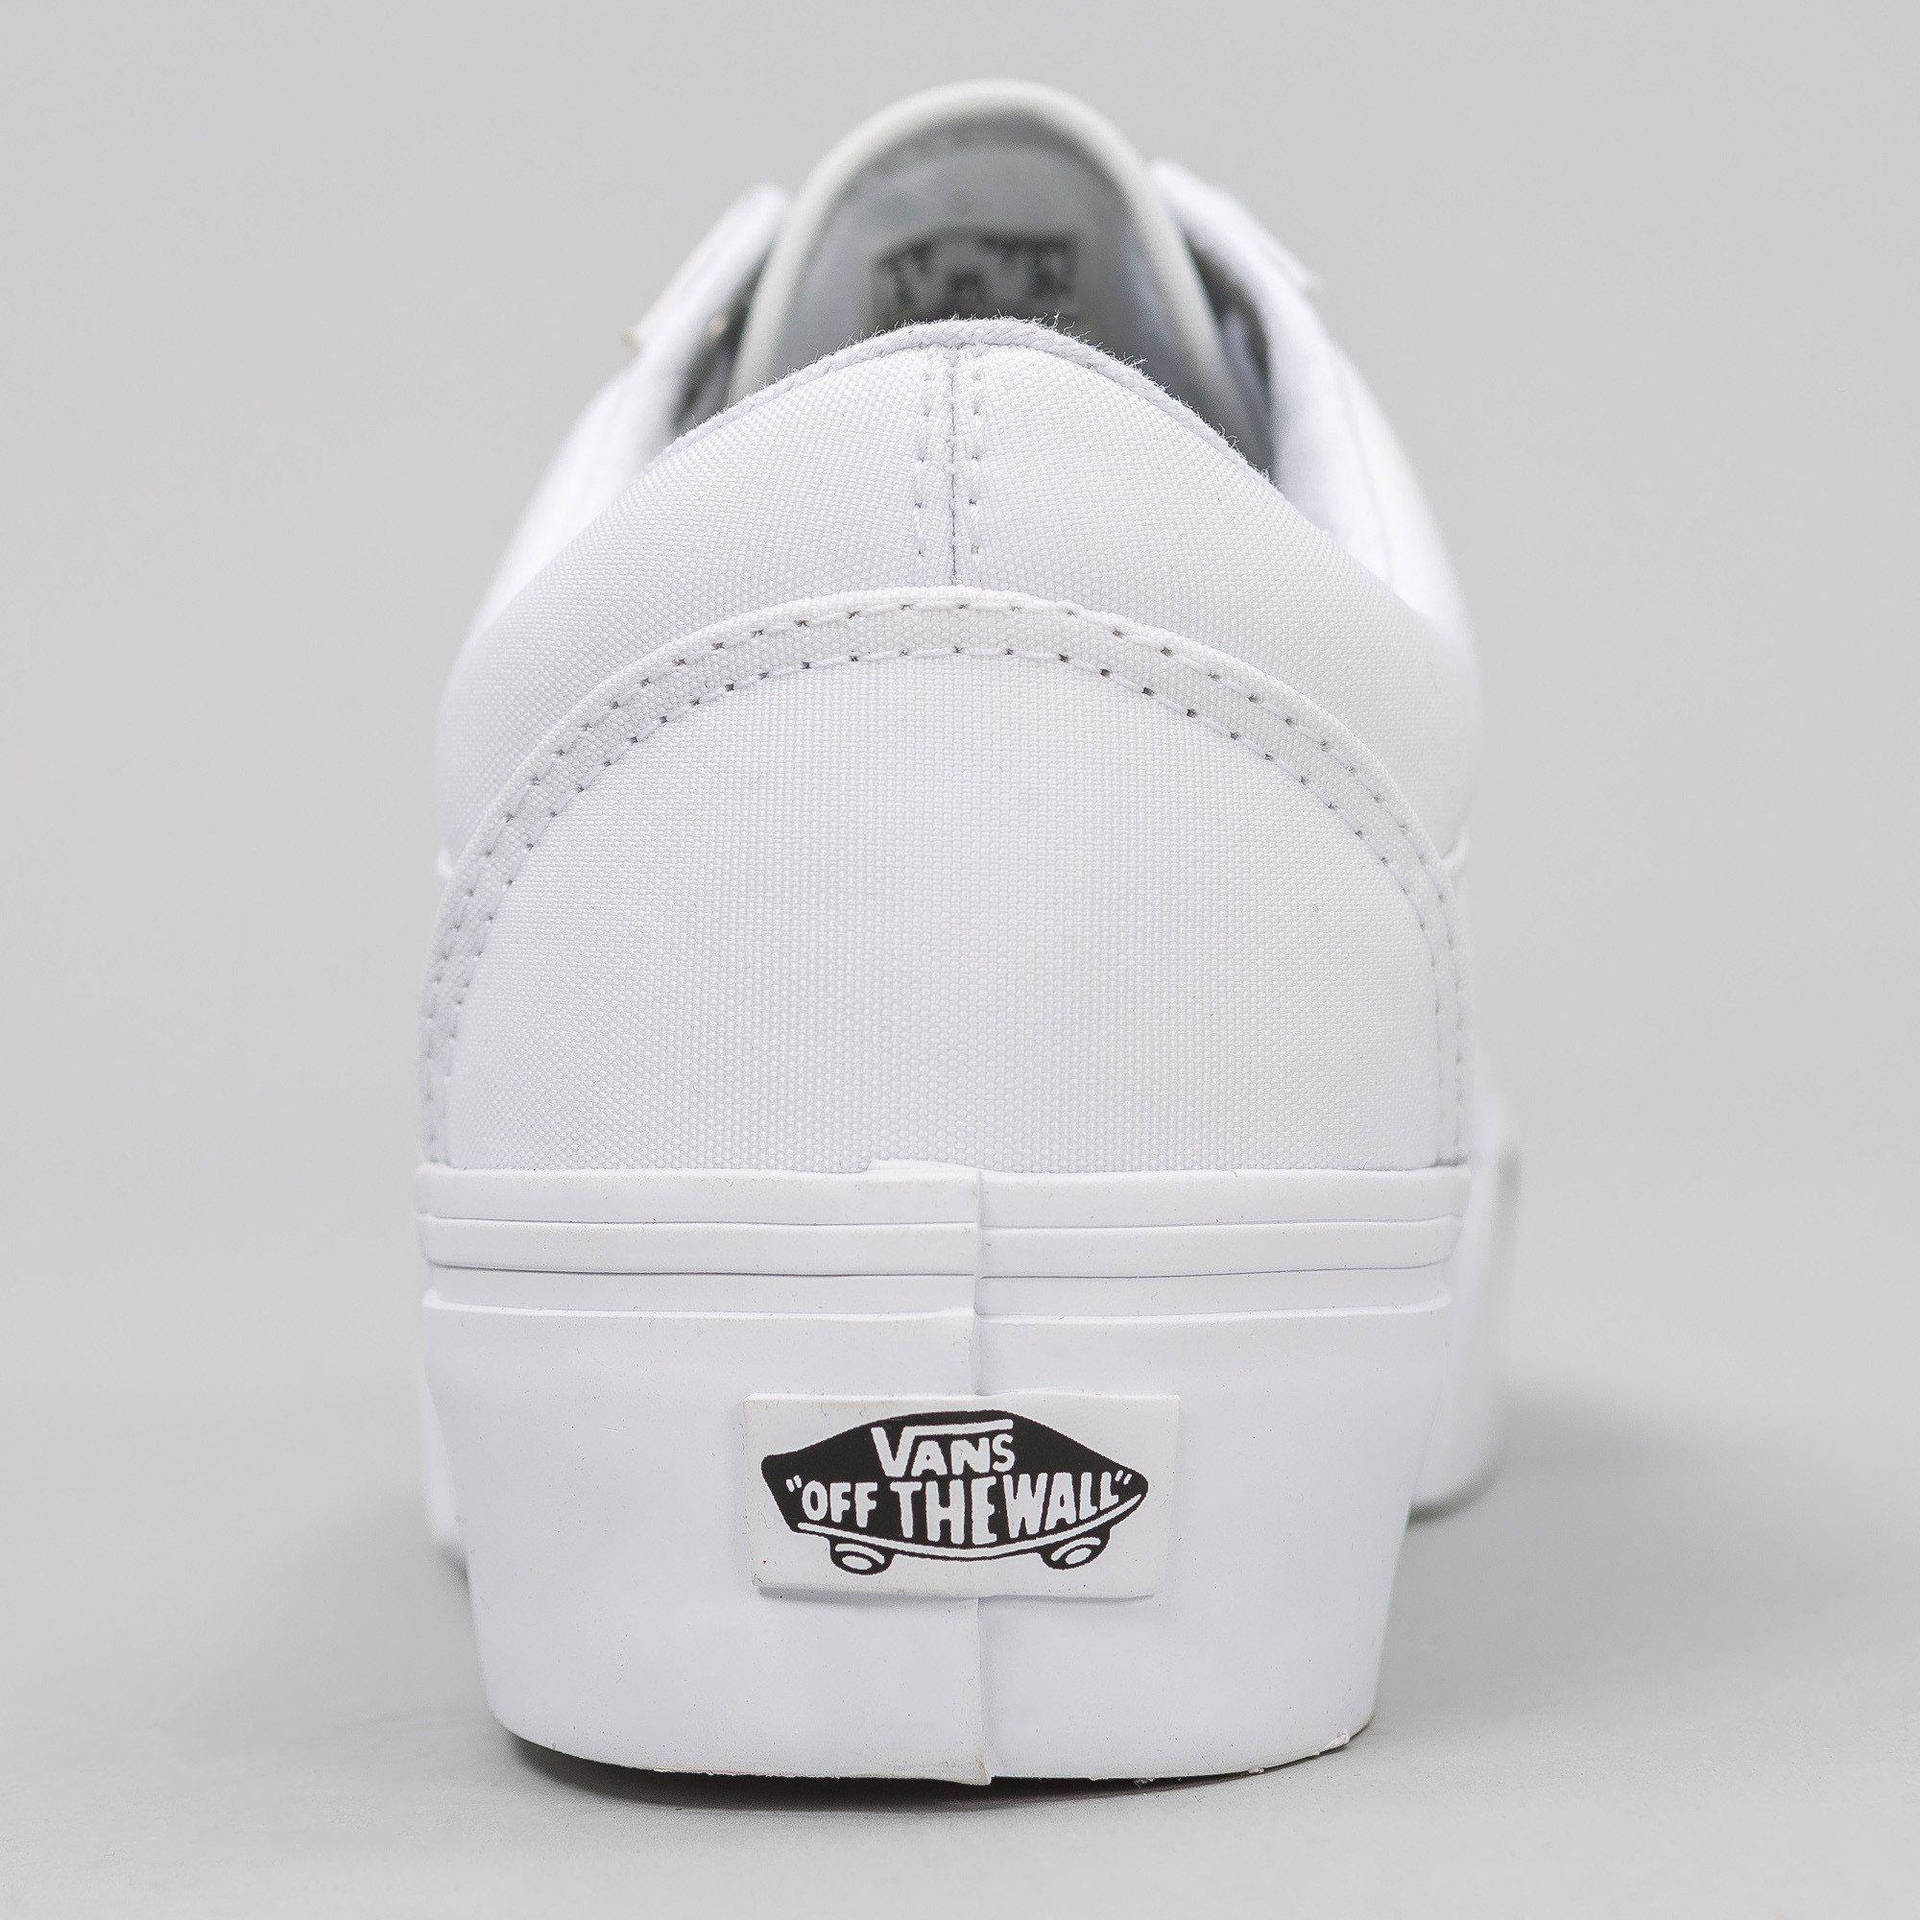 Vans Off The Wall White Shoe Background